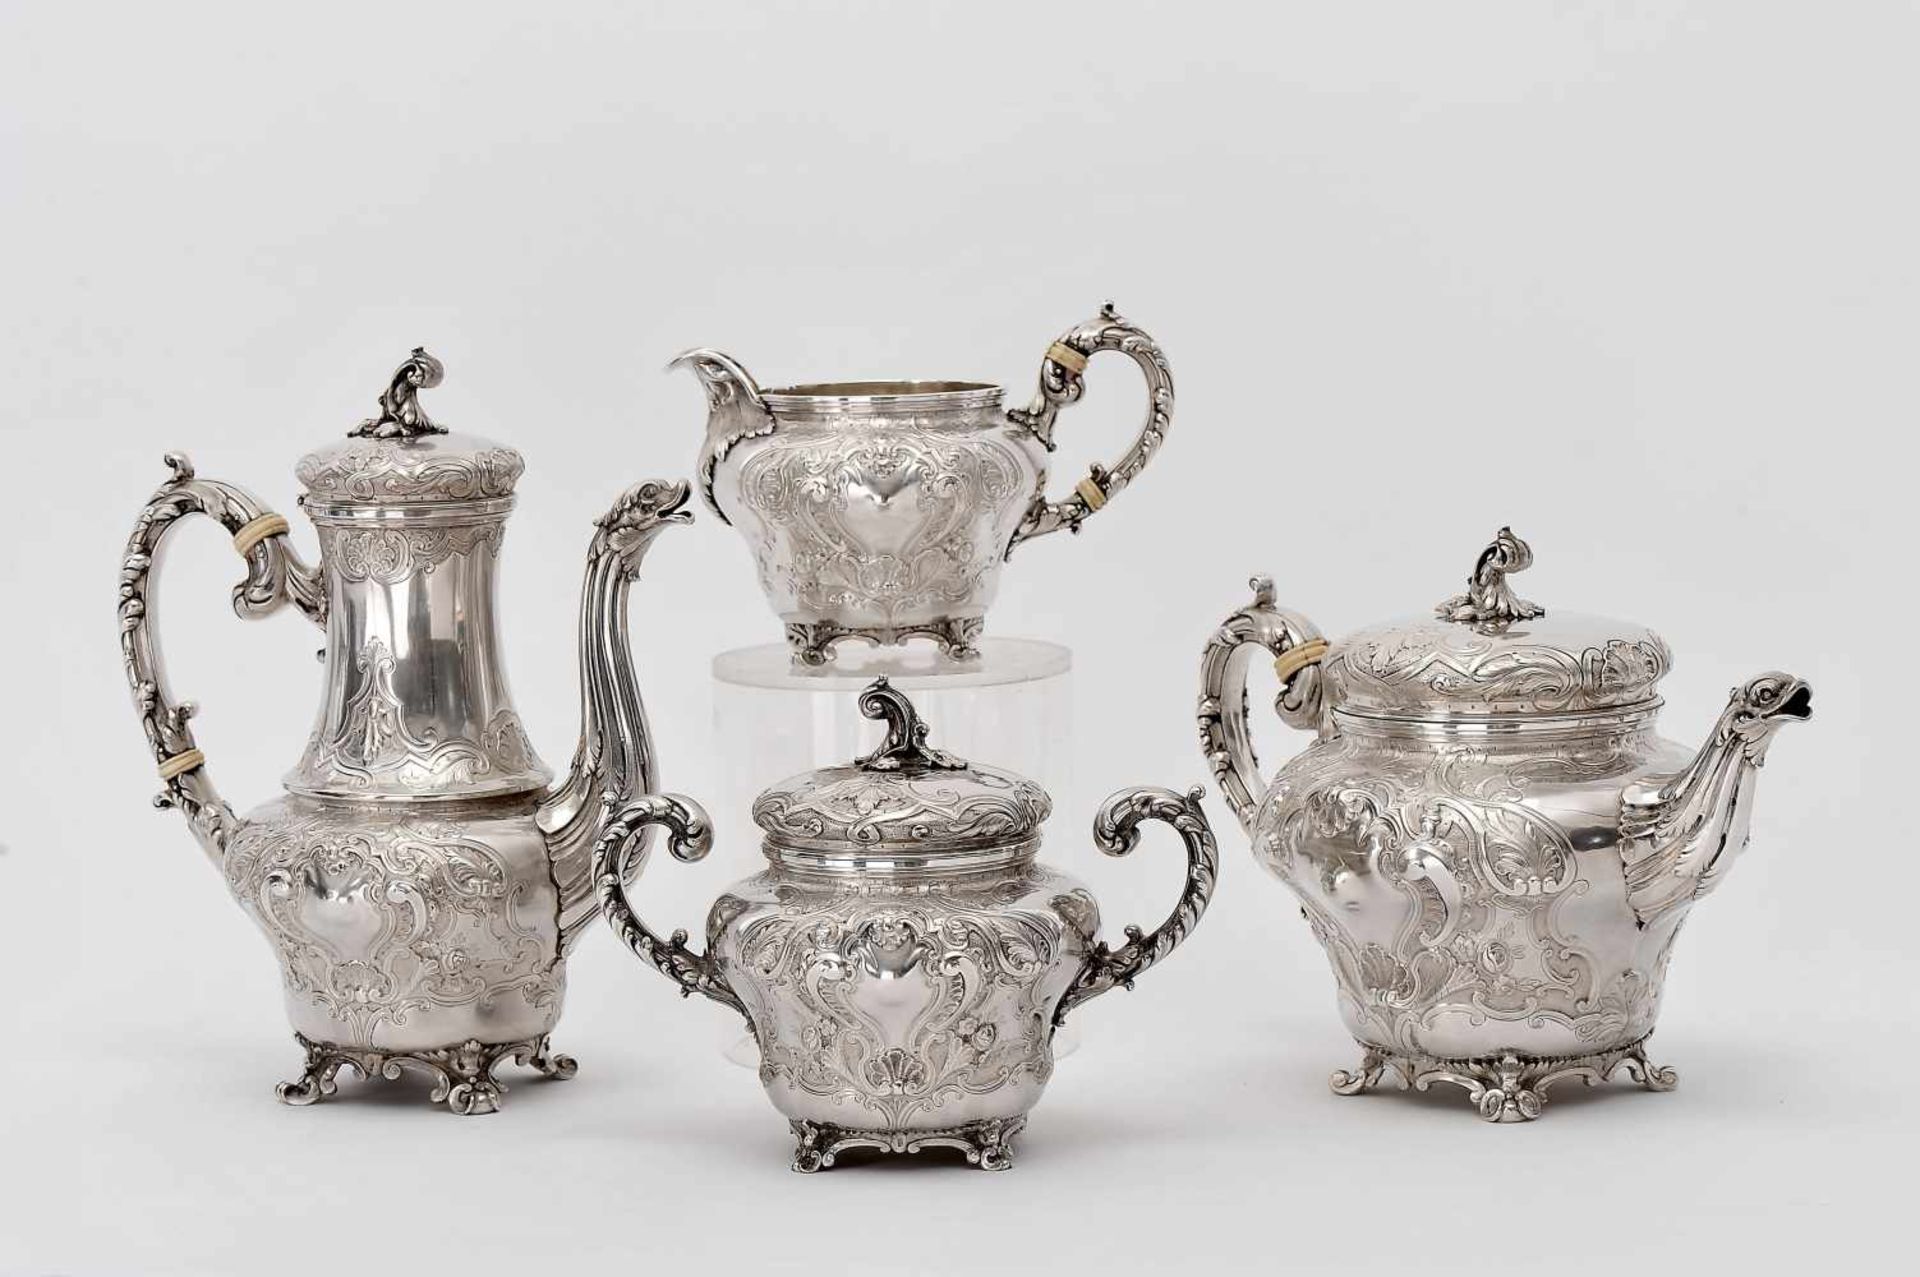 A Tea and Coffee Set, rocaille style, 916/1000 silver, repoussé decoration, consisting of teapot,